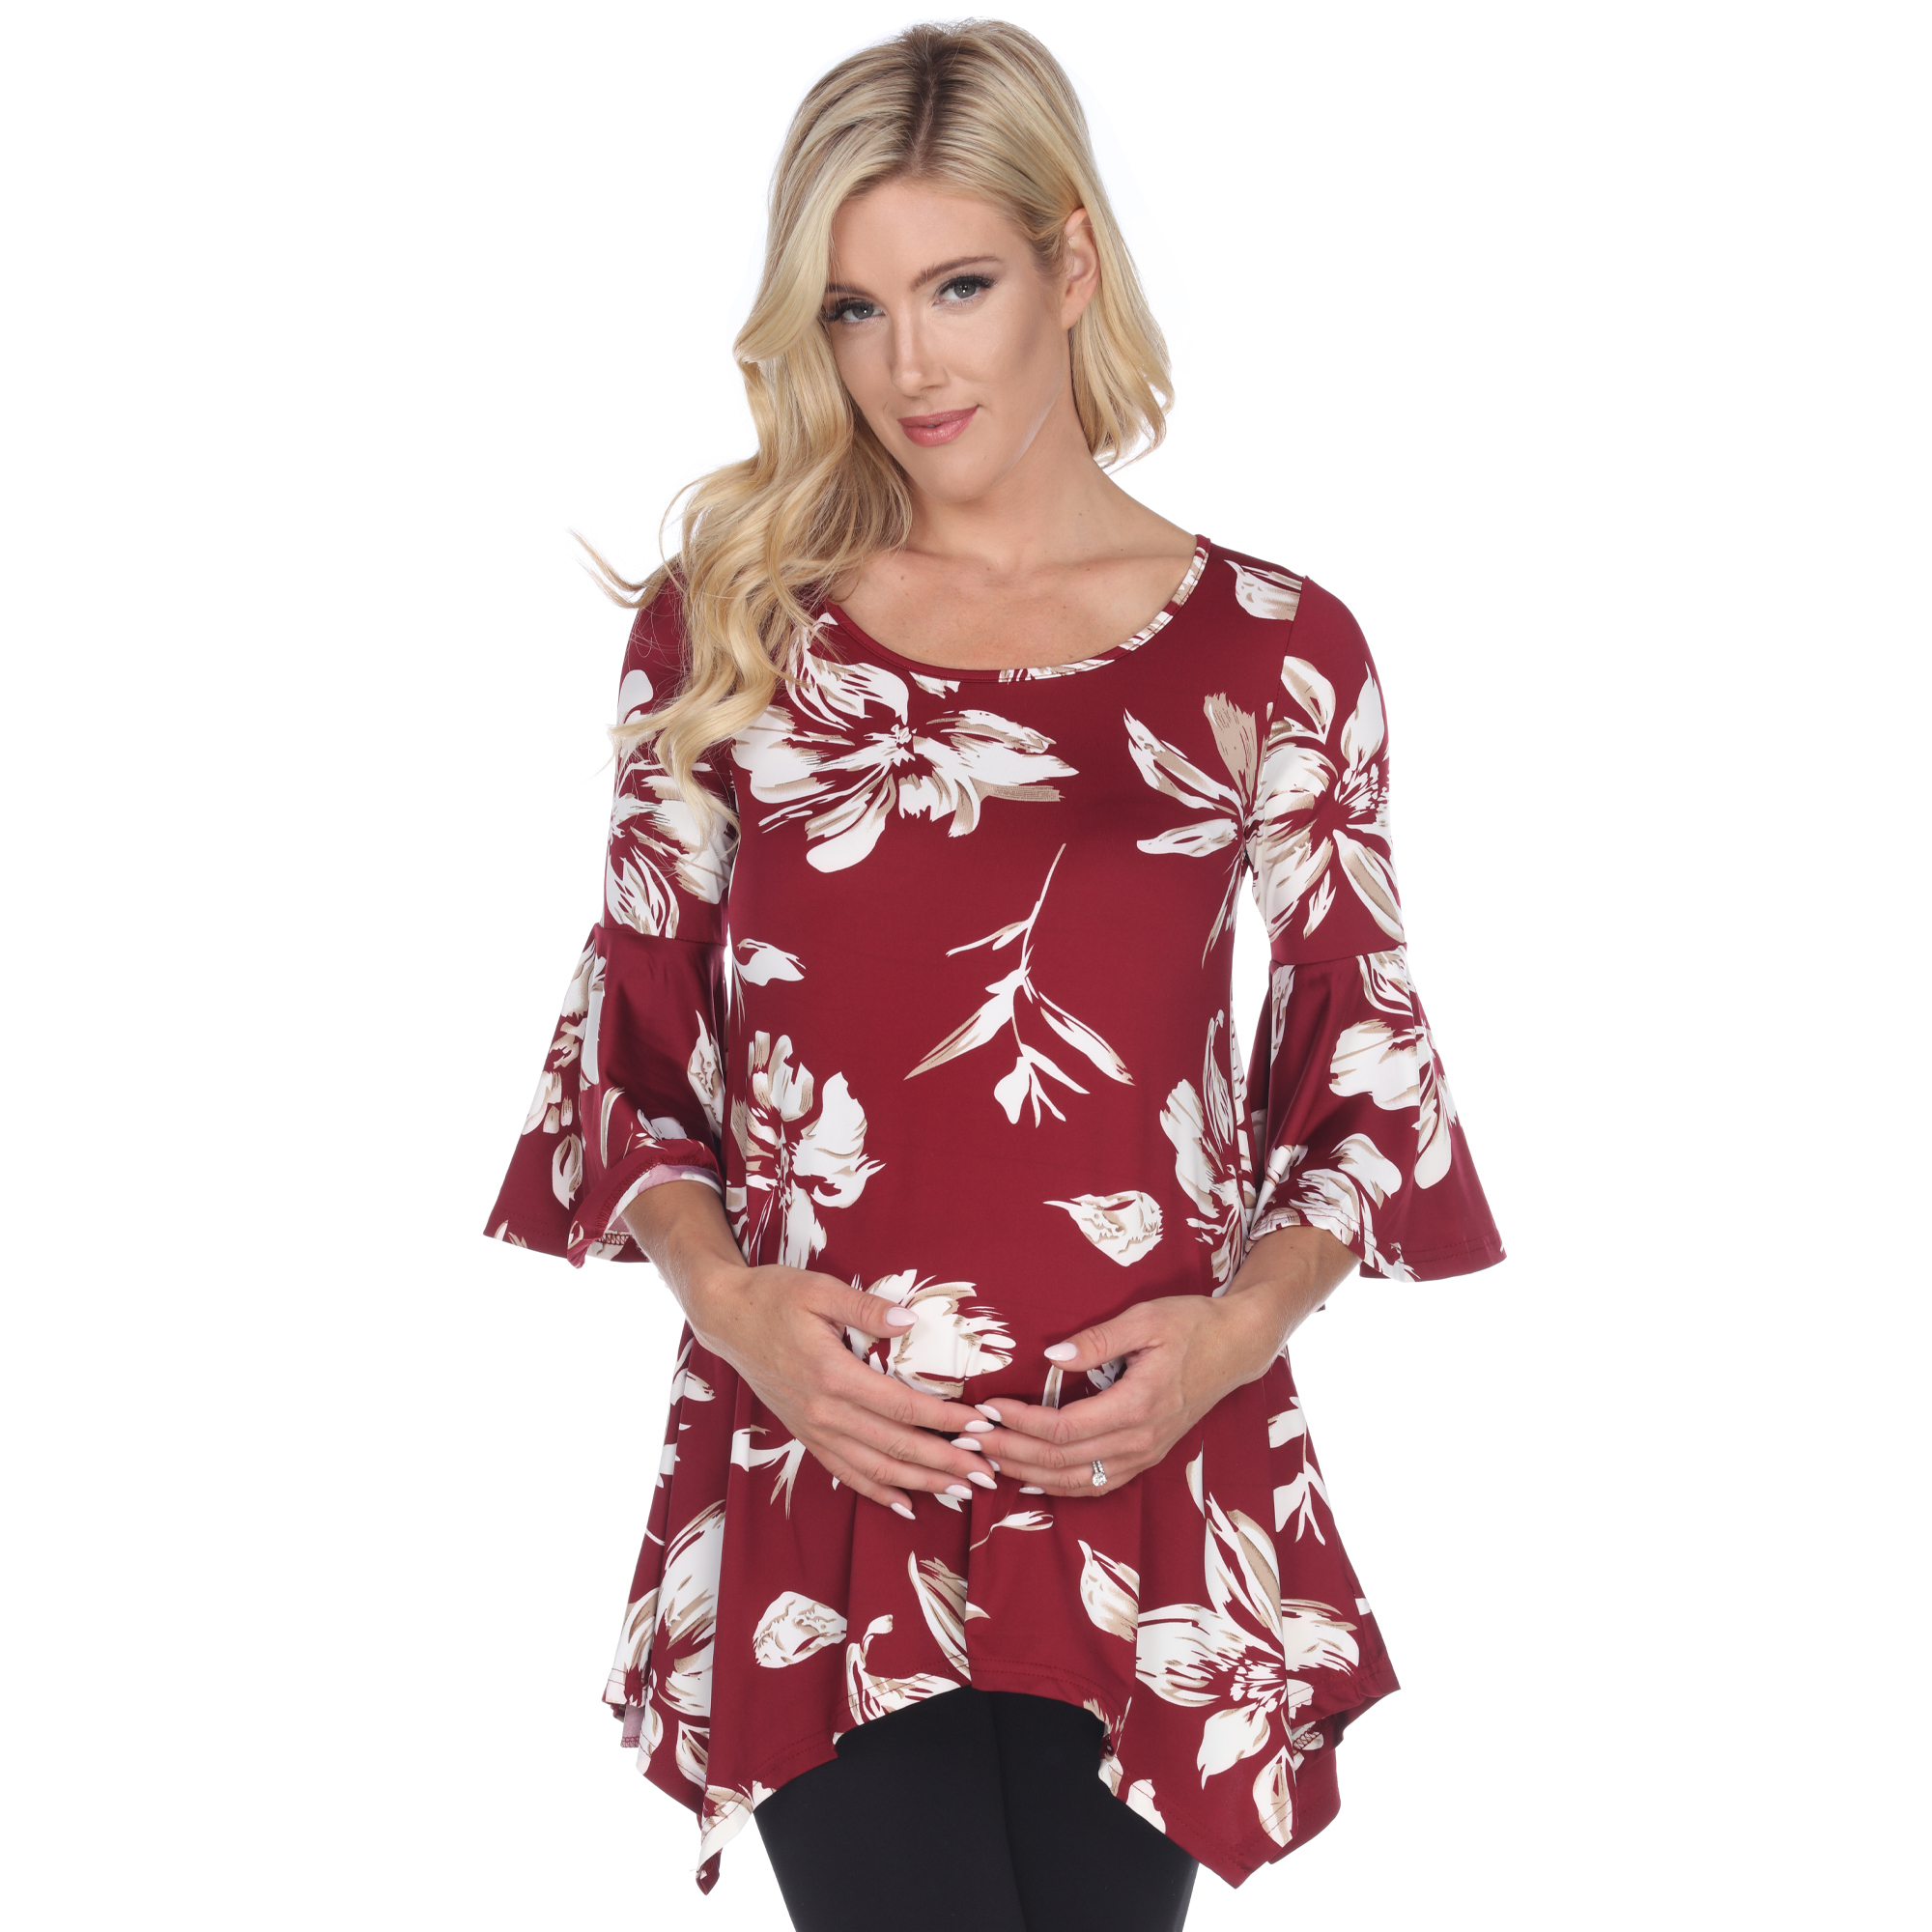 White Mark Women's Maternity Floral Print Quarter Sleeve Tunic Top With Pockets - Navy, Medium